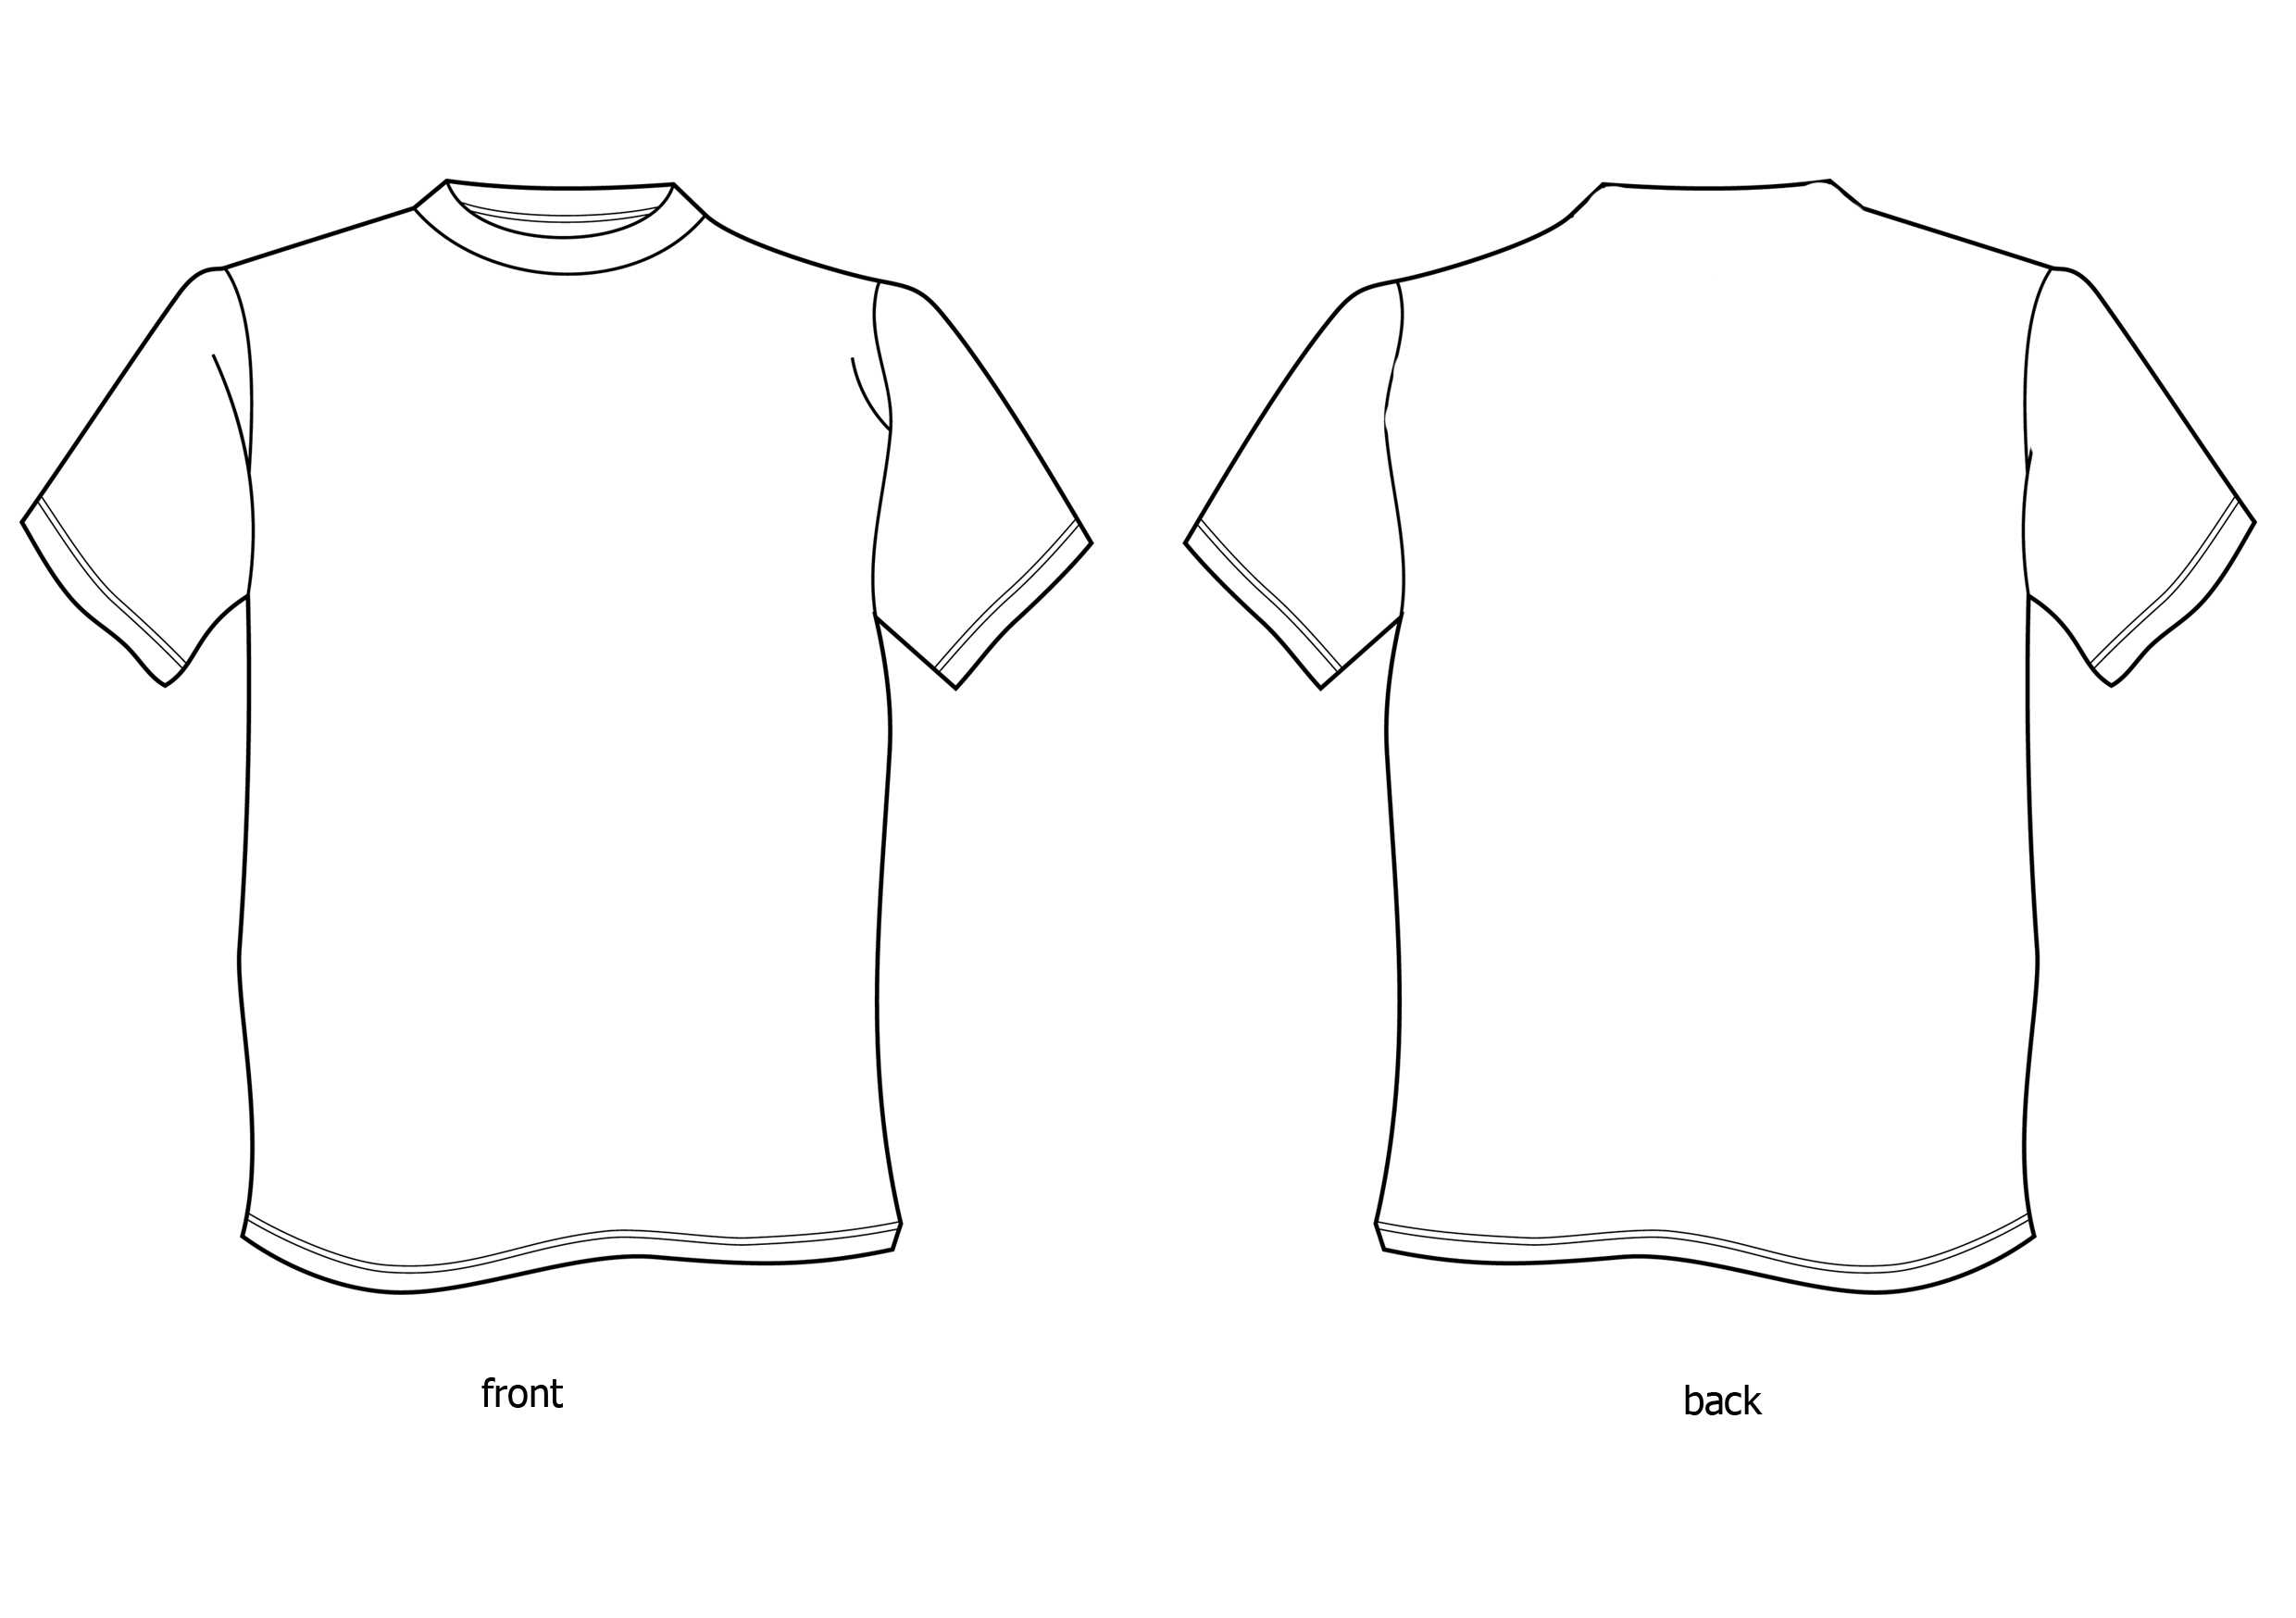 Free T Shirt Design Template, Download Free Clip Art, Free Regarding Blank T Shirt Design Template Psd